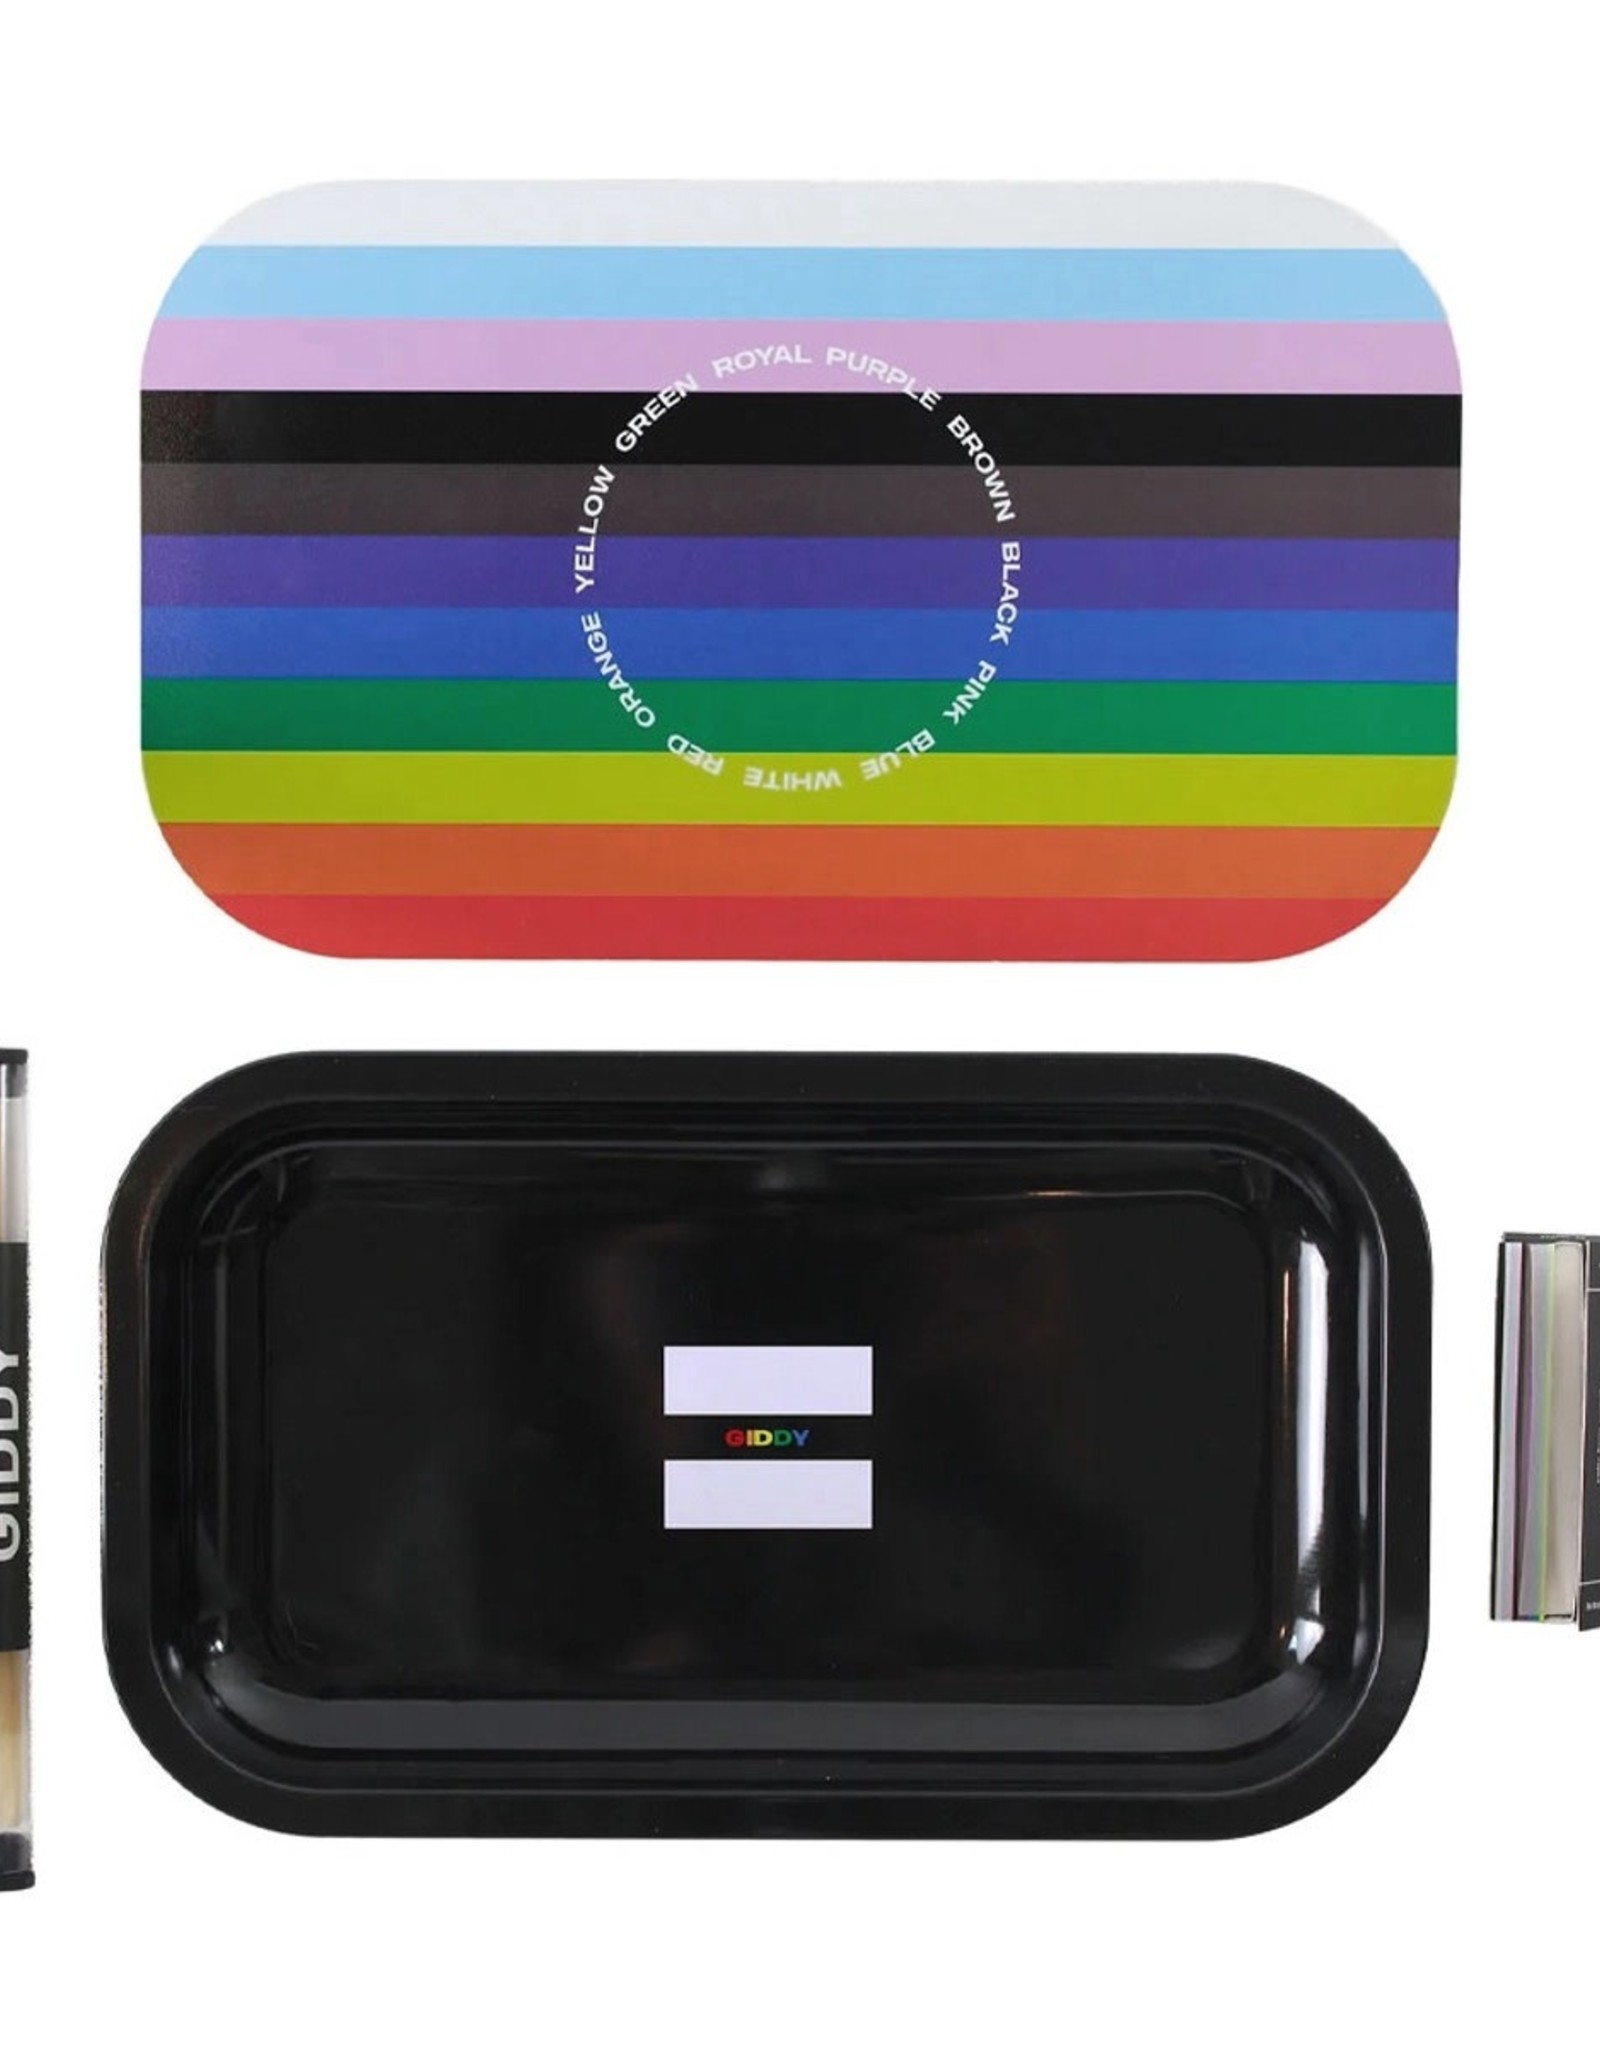 Giddy Equality Rolling Tray Bundle with Lid, Cones, and Papers